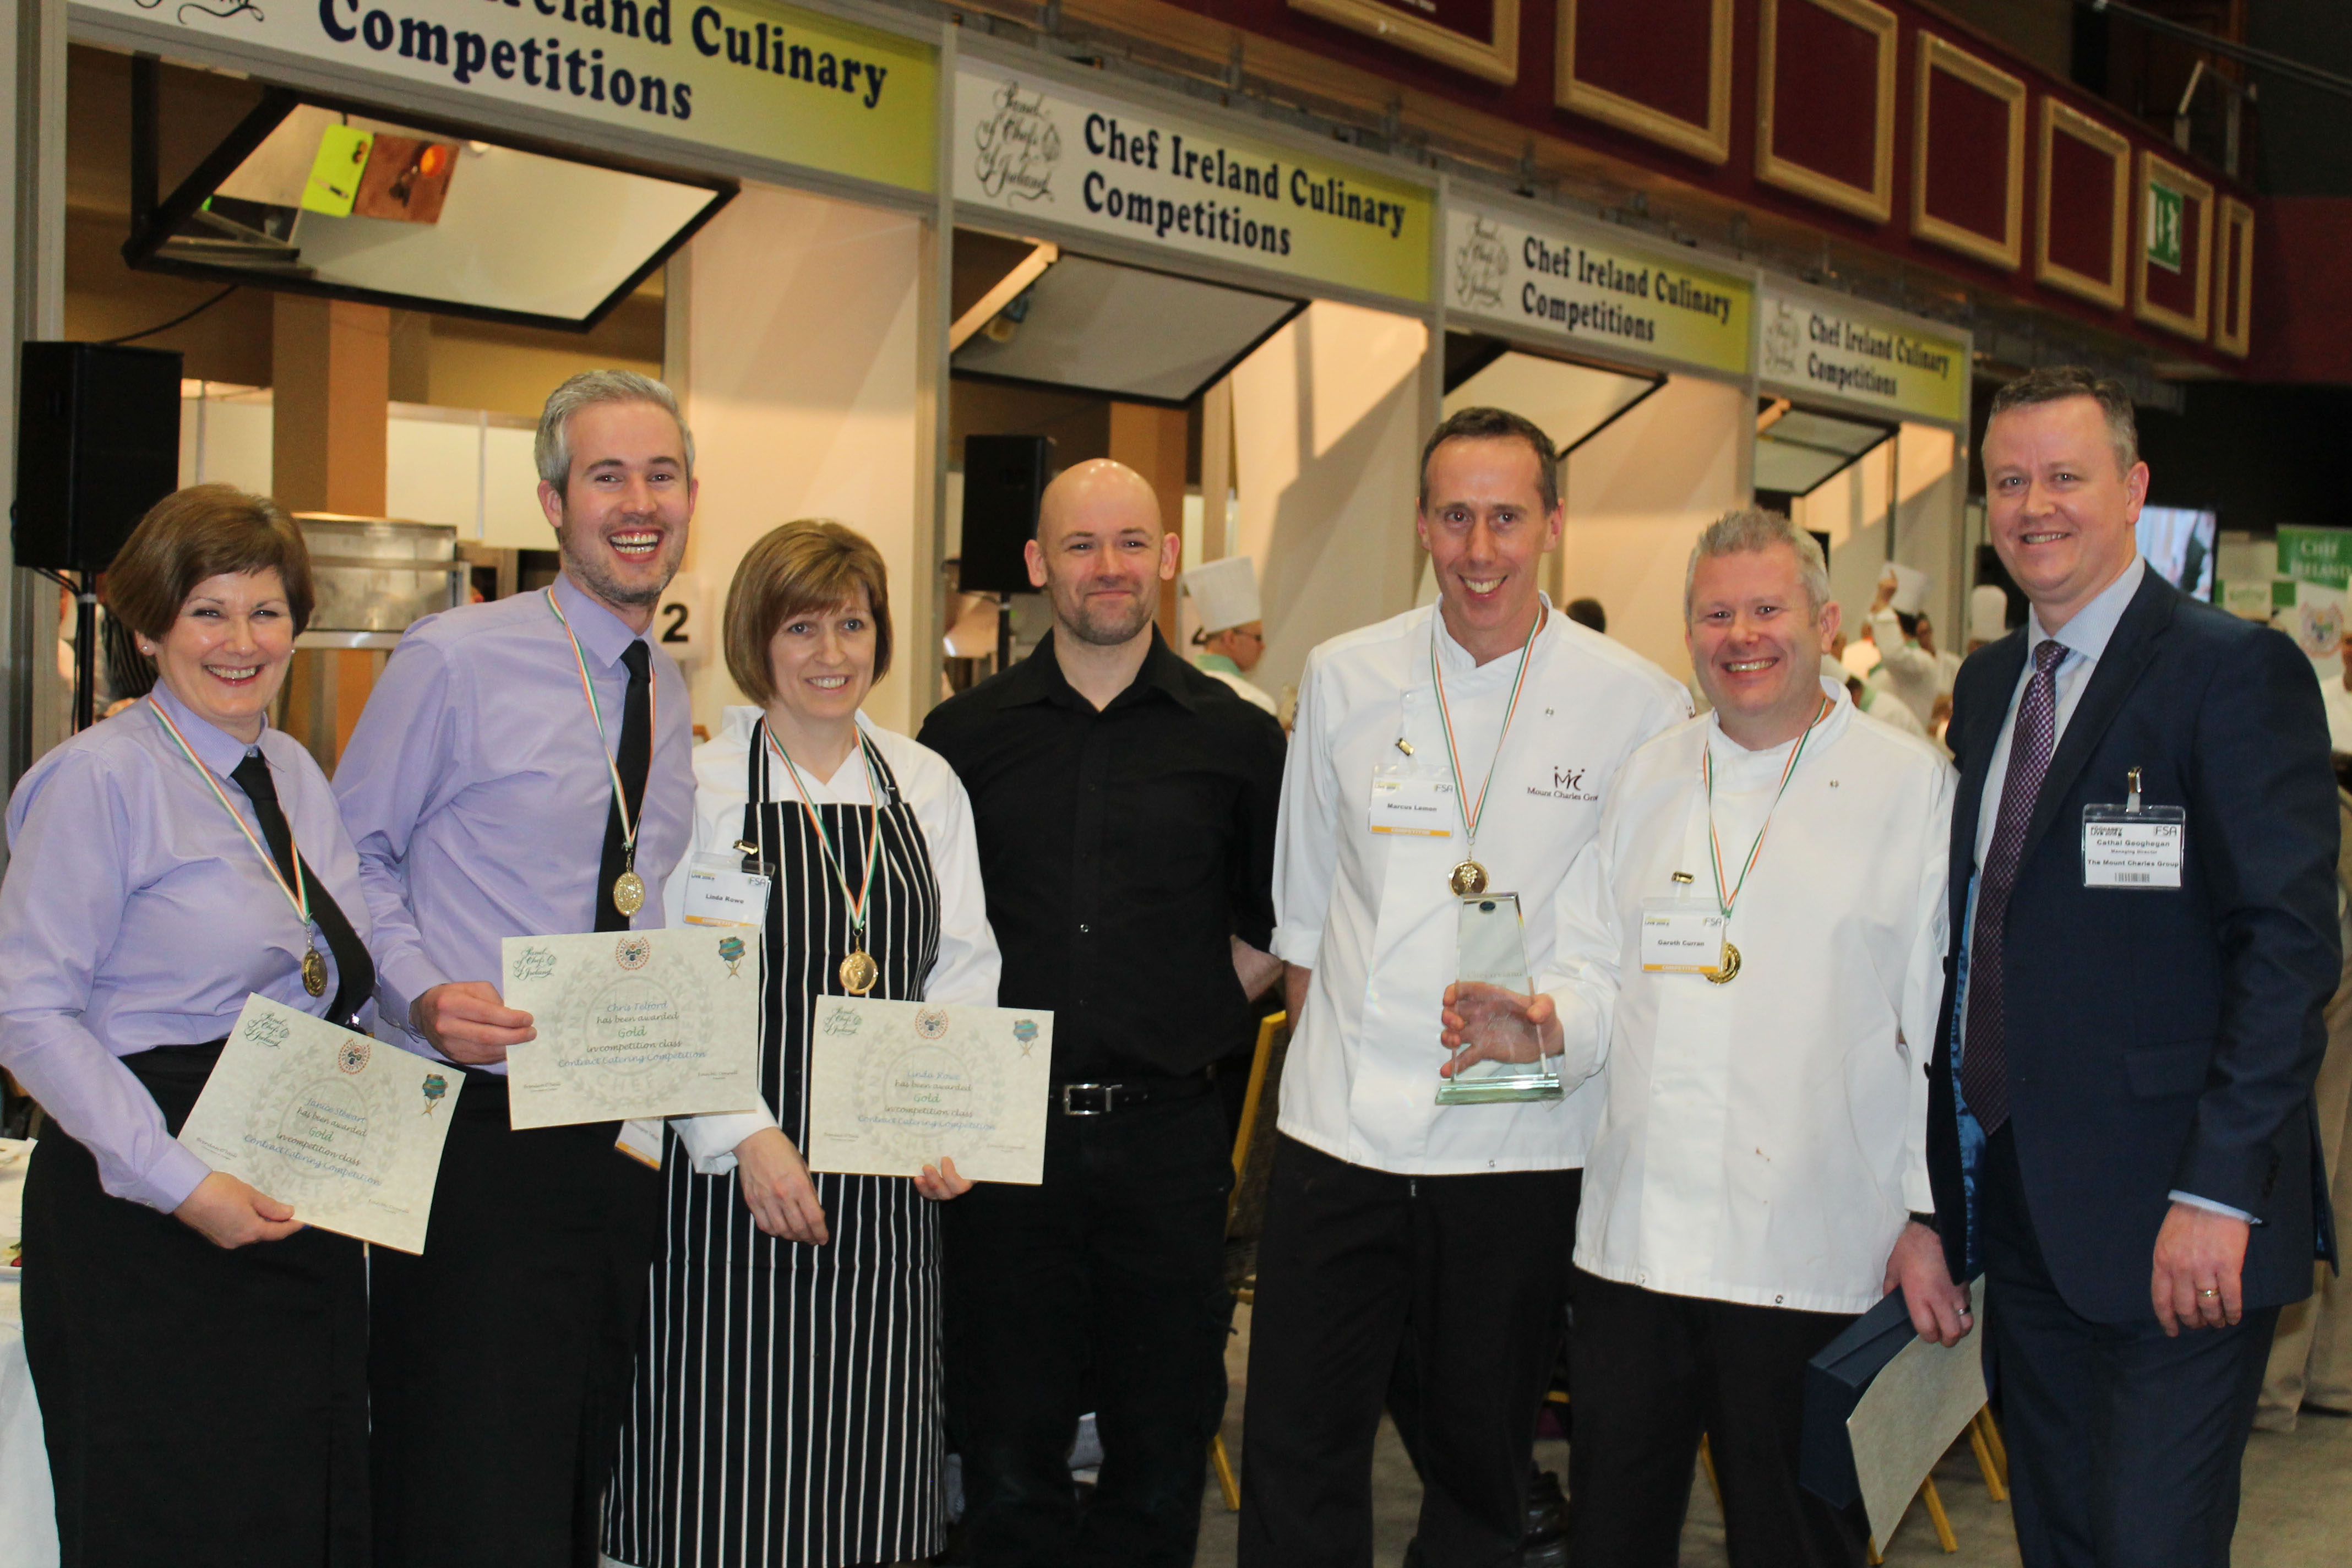 Recipe for success – Mount Charles scoops gold at Food & Bev Live event